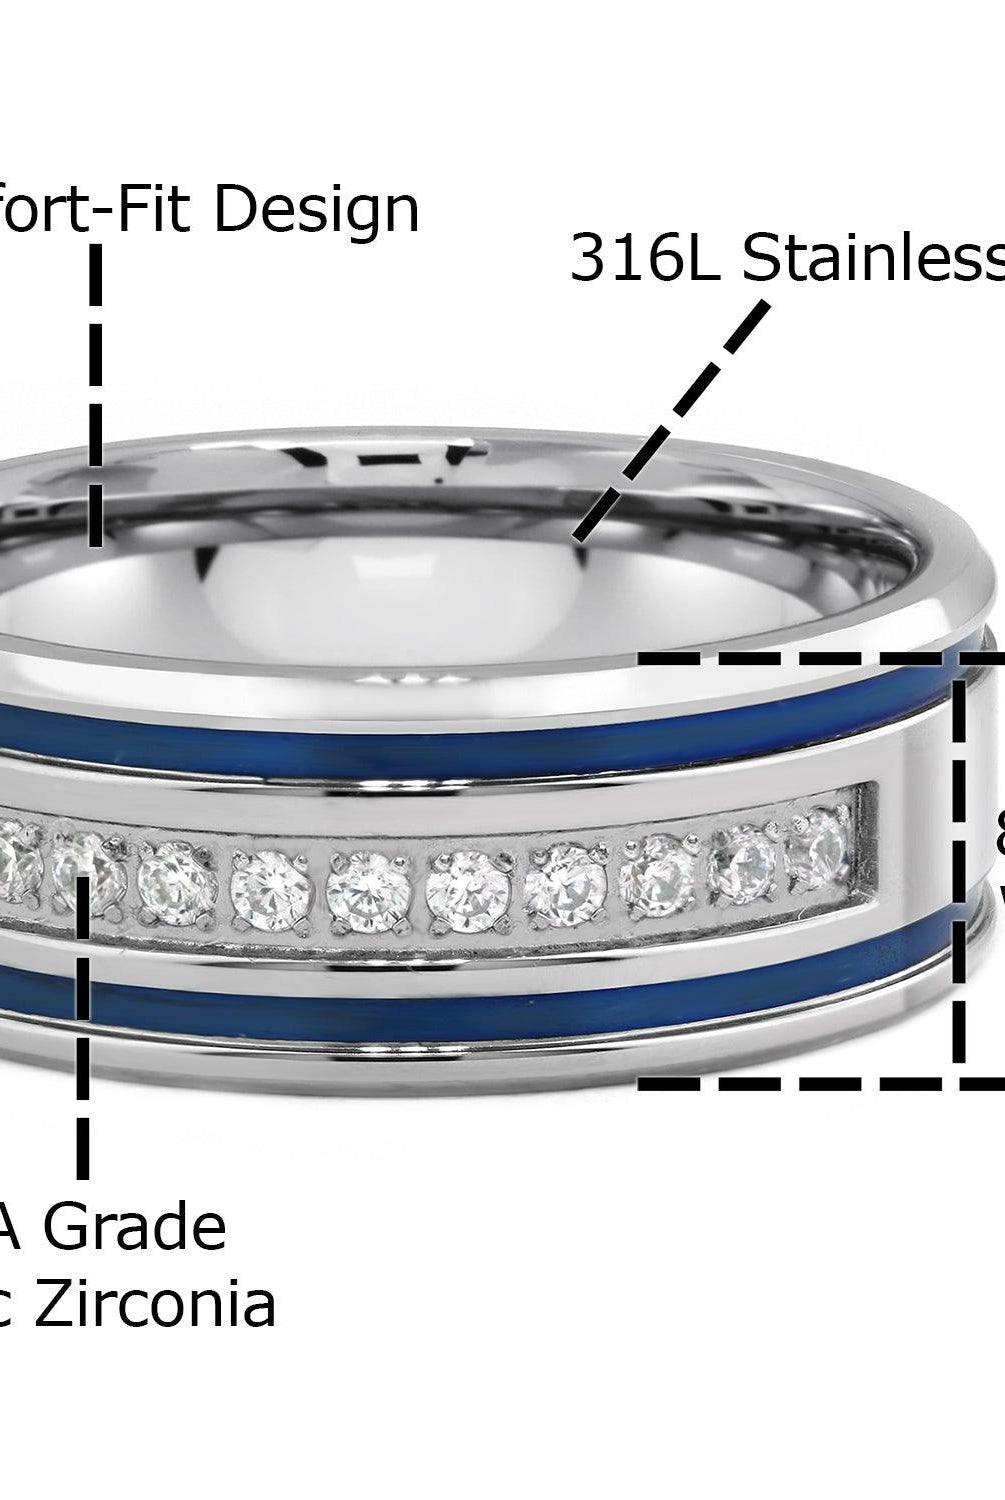 Men's Jewelry - Rings Mens Stainless Steel CZ Blue Stripes Rings for Him